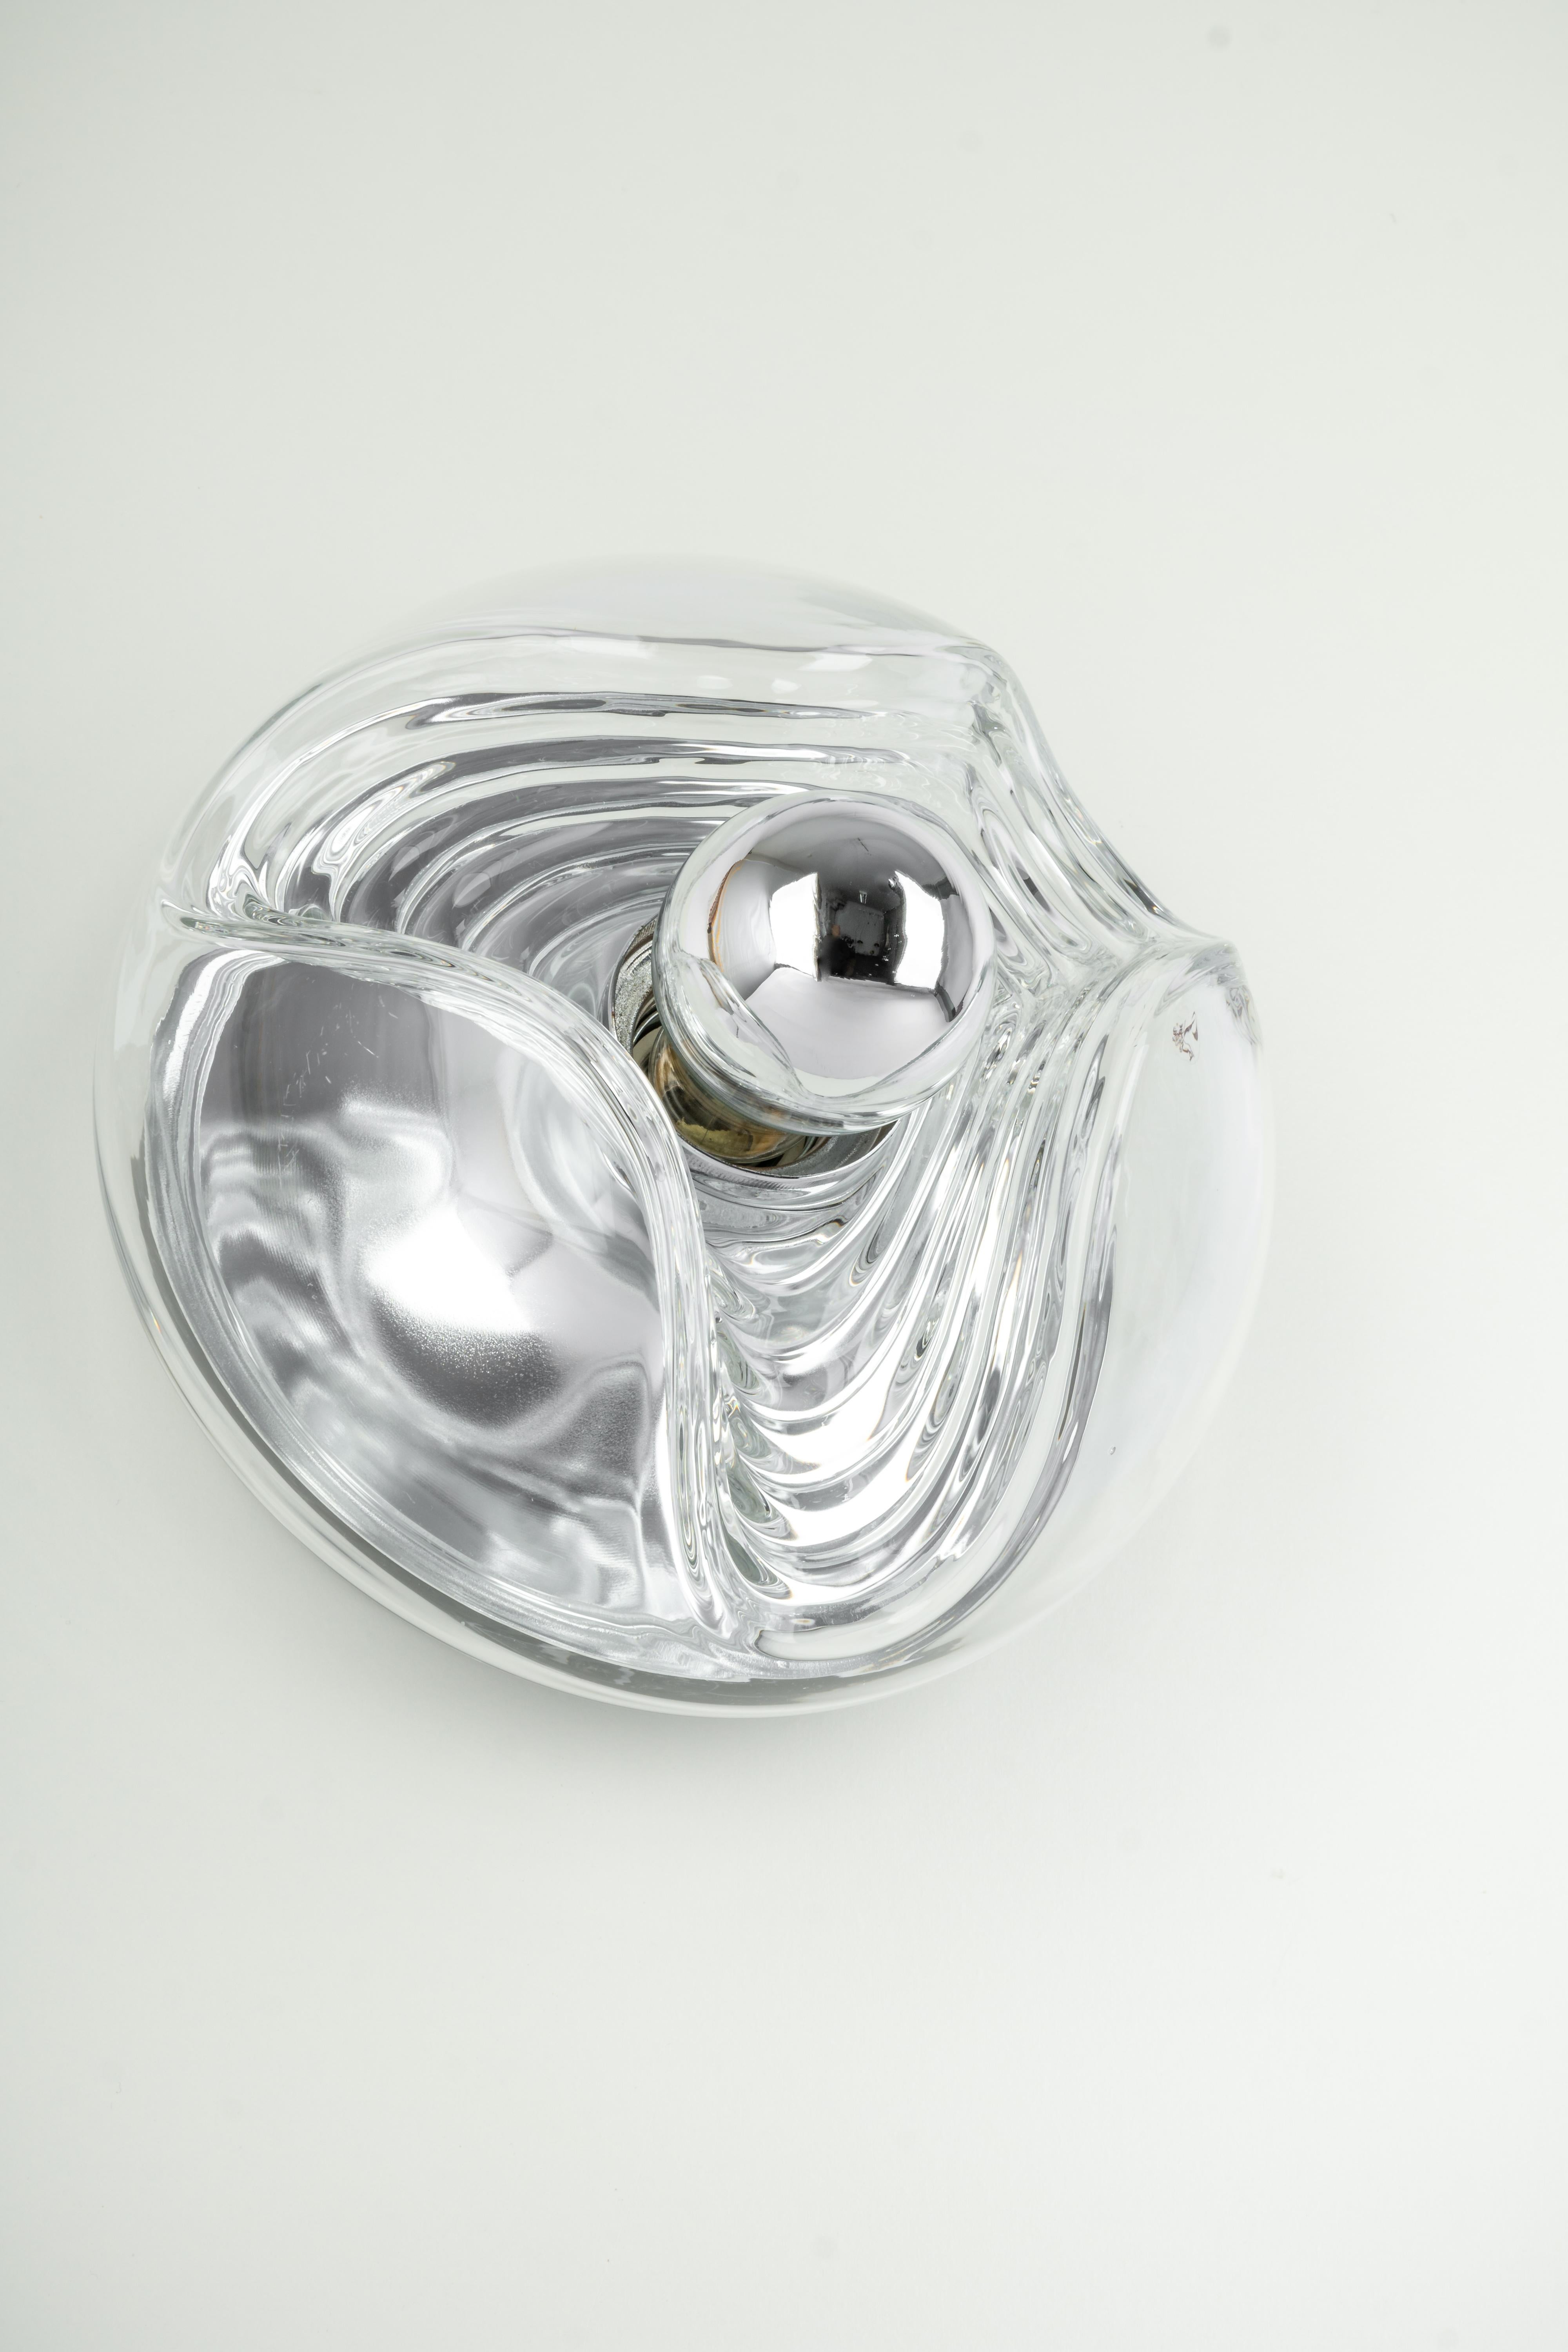 A special round biomorphic Clear crystal glass wall sconce designed by Koch & Lowy for Peill & Putzler, manufactured in Germany, circa 1970s.

Sockets: One x E27 standard bulb. (100 W max).-
Light bulbs are not included. It is possible to install